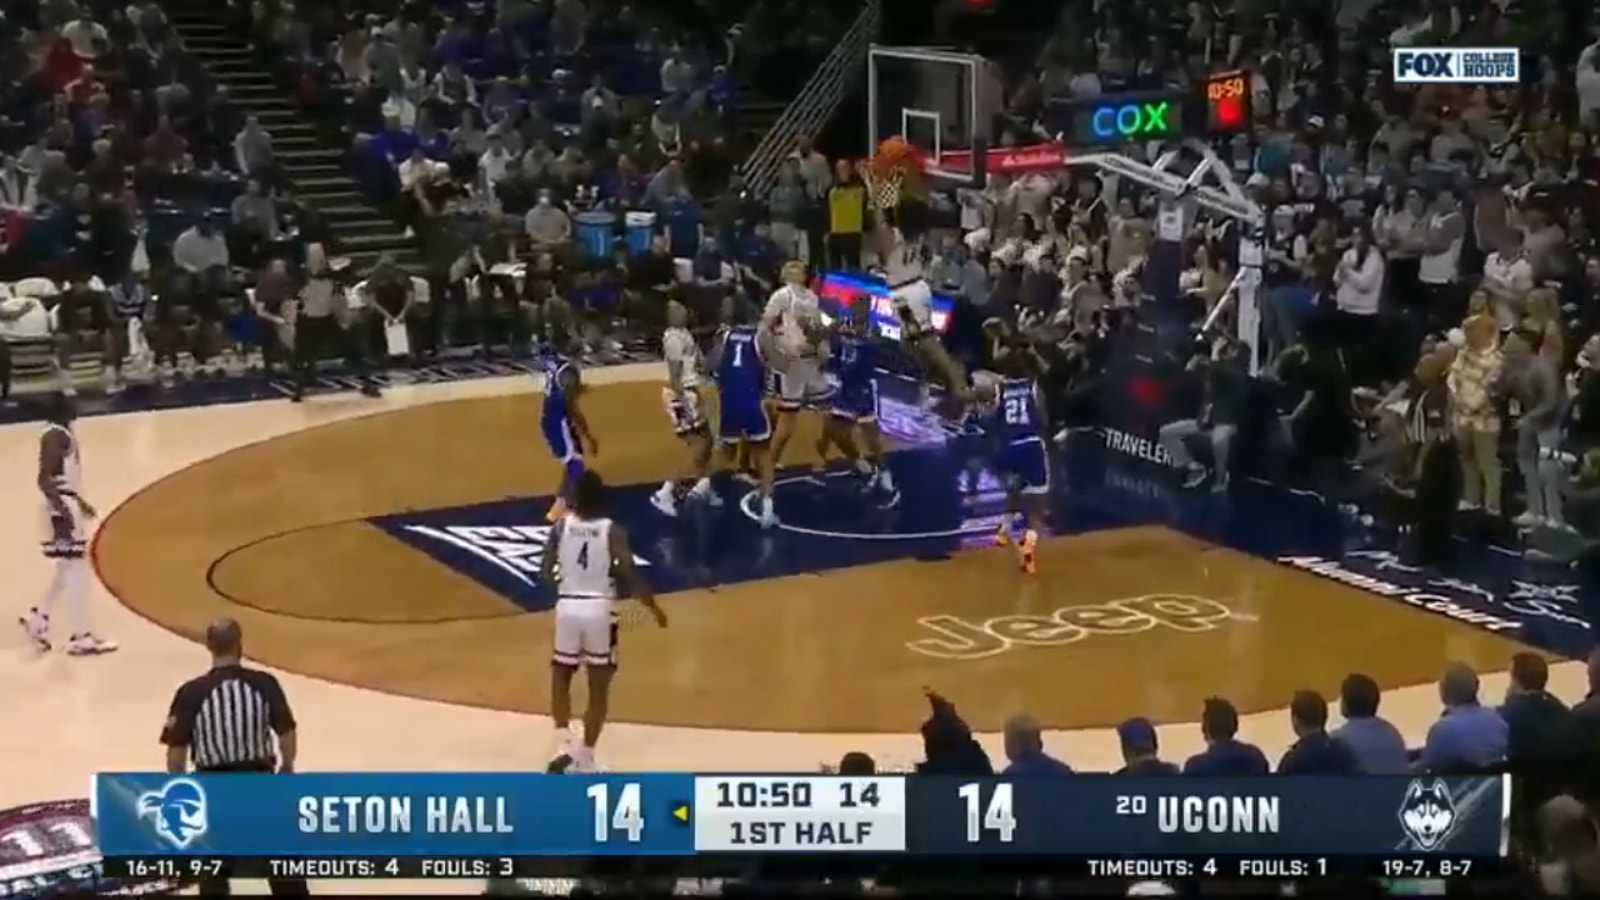 Andre Jackson Jr. throws it down after a perfect alley-oop from Jordan Hawkins to give UConn the early lead